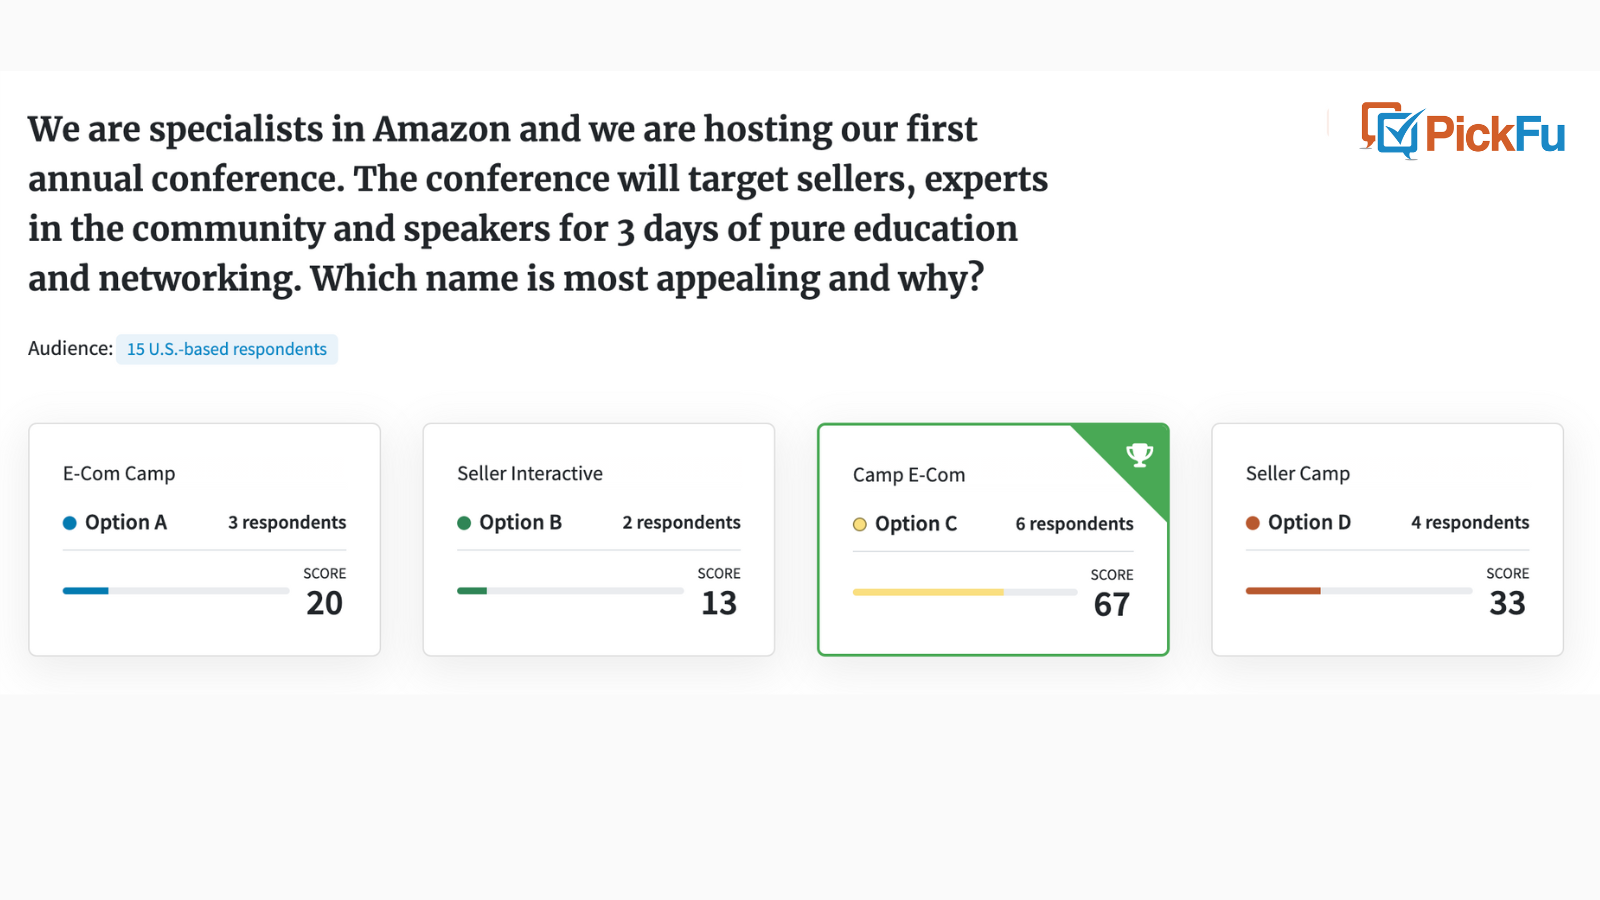 Screenshot of PickFu poll testing the name of e-commerce conference CampEcom